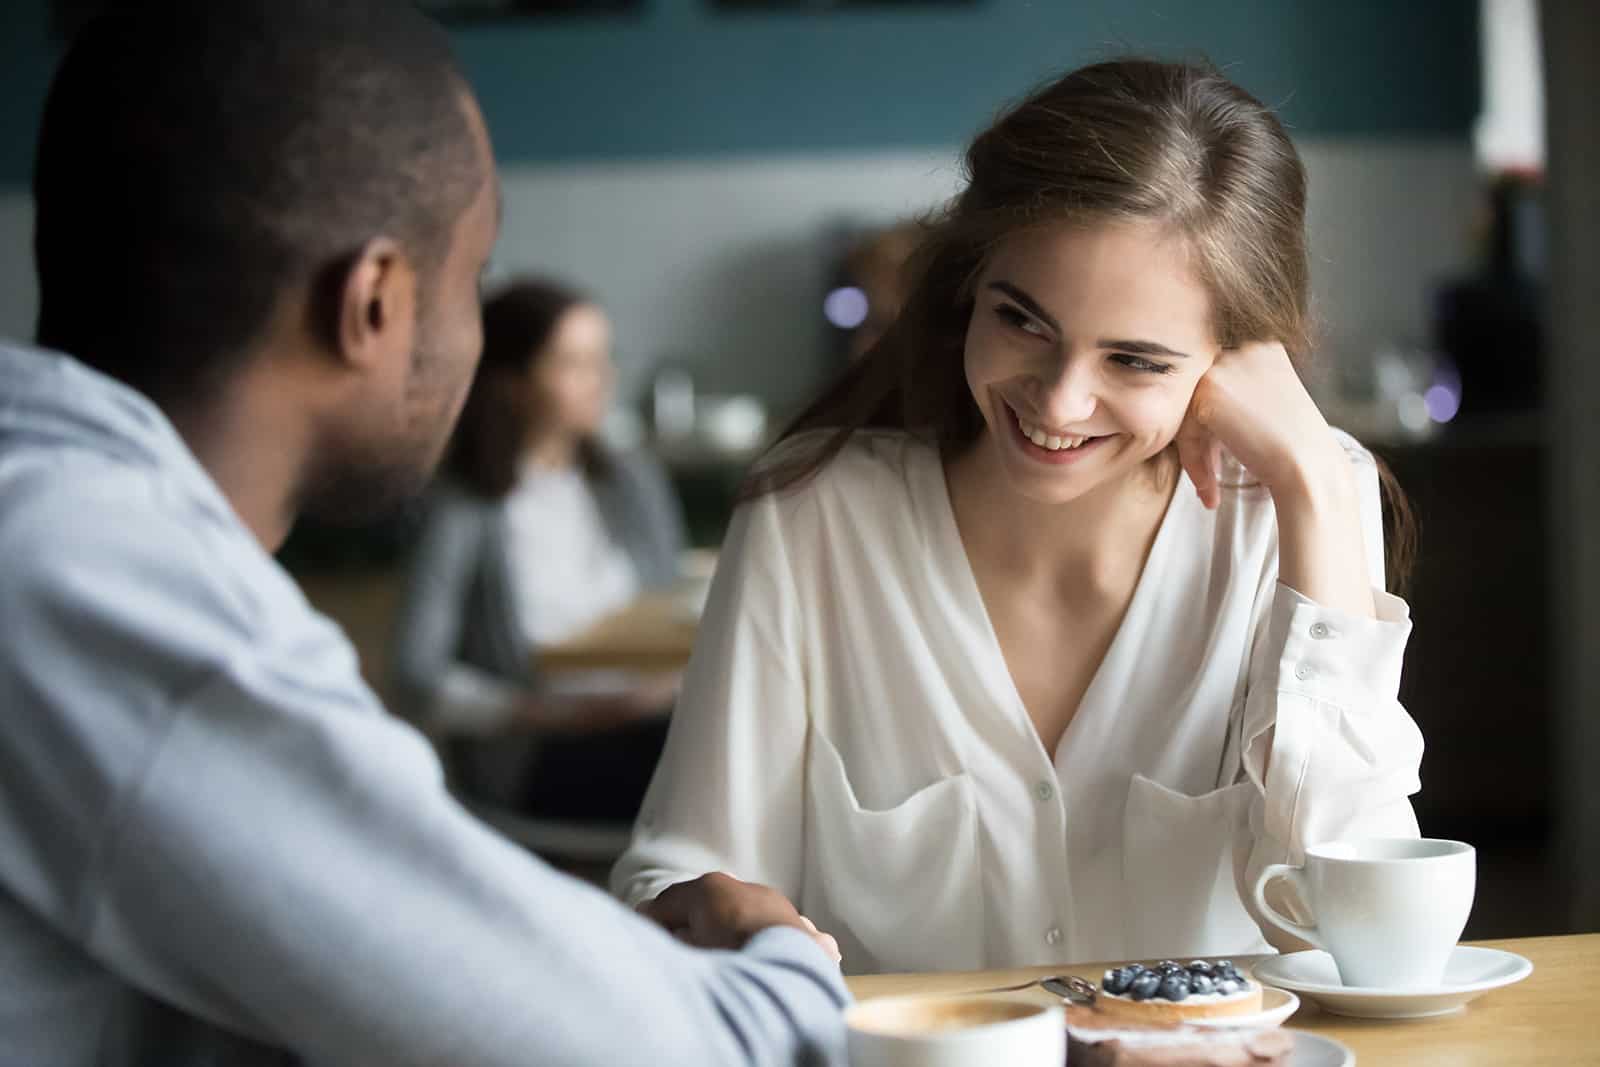 man holding hand of smiling woman in cafe on a date